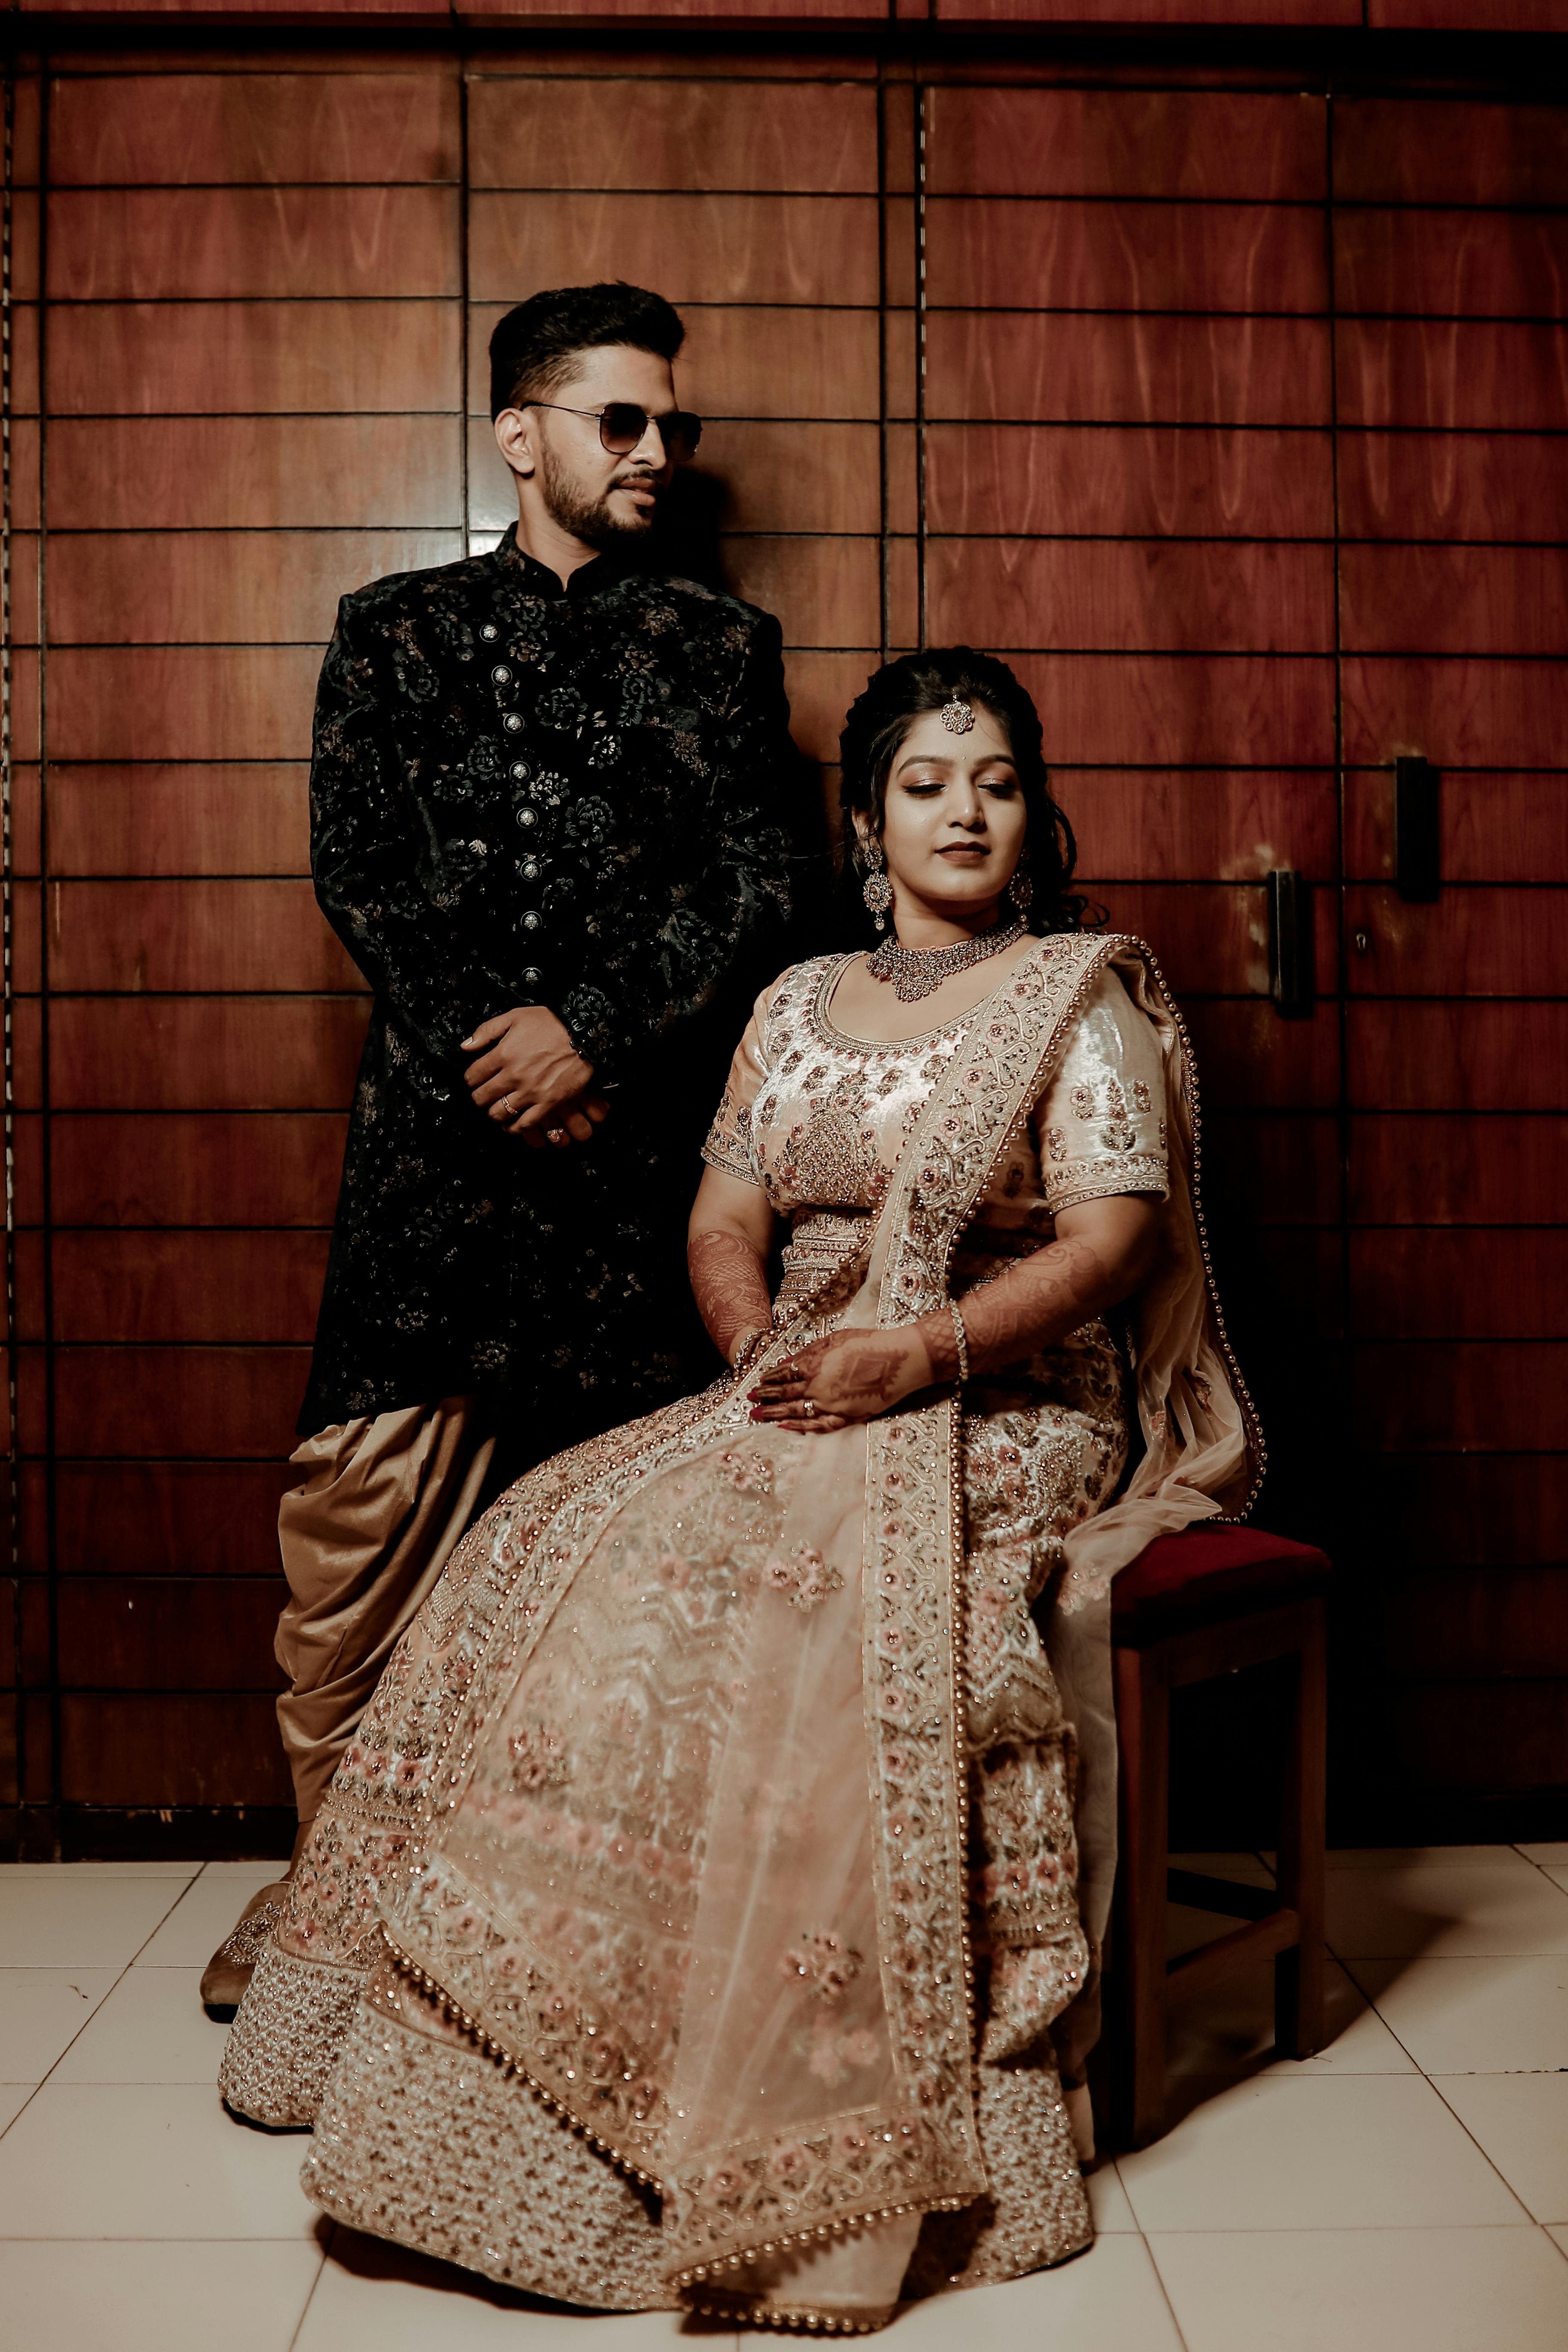 Photo of couple portrait in a romantic pose on wedding day